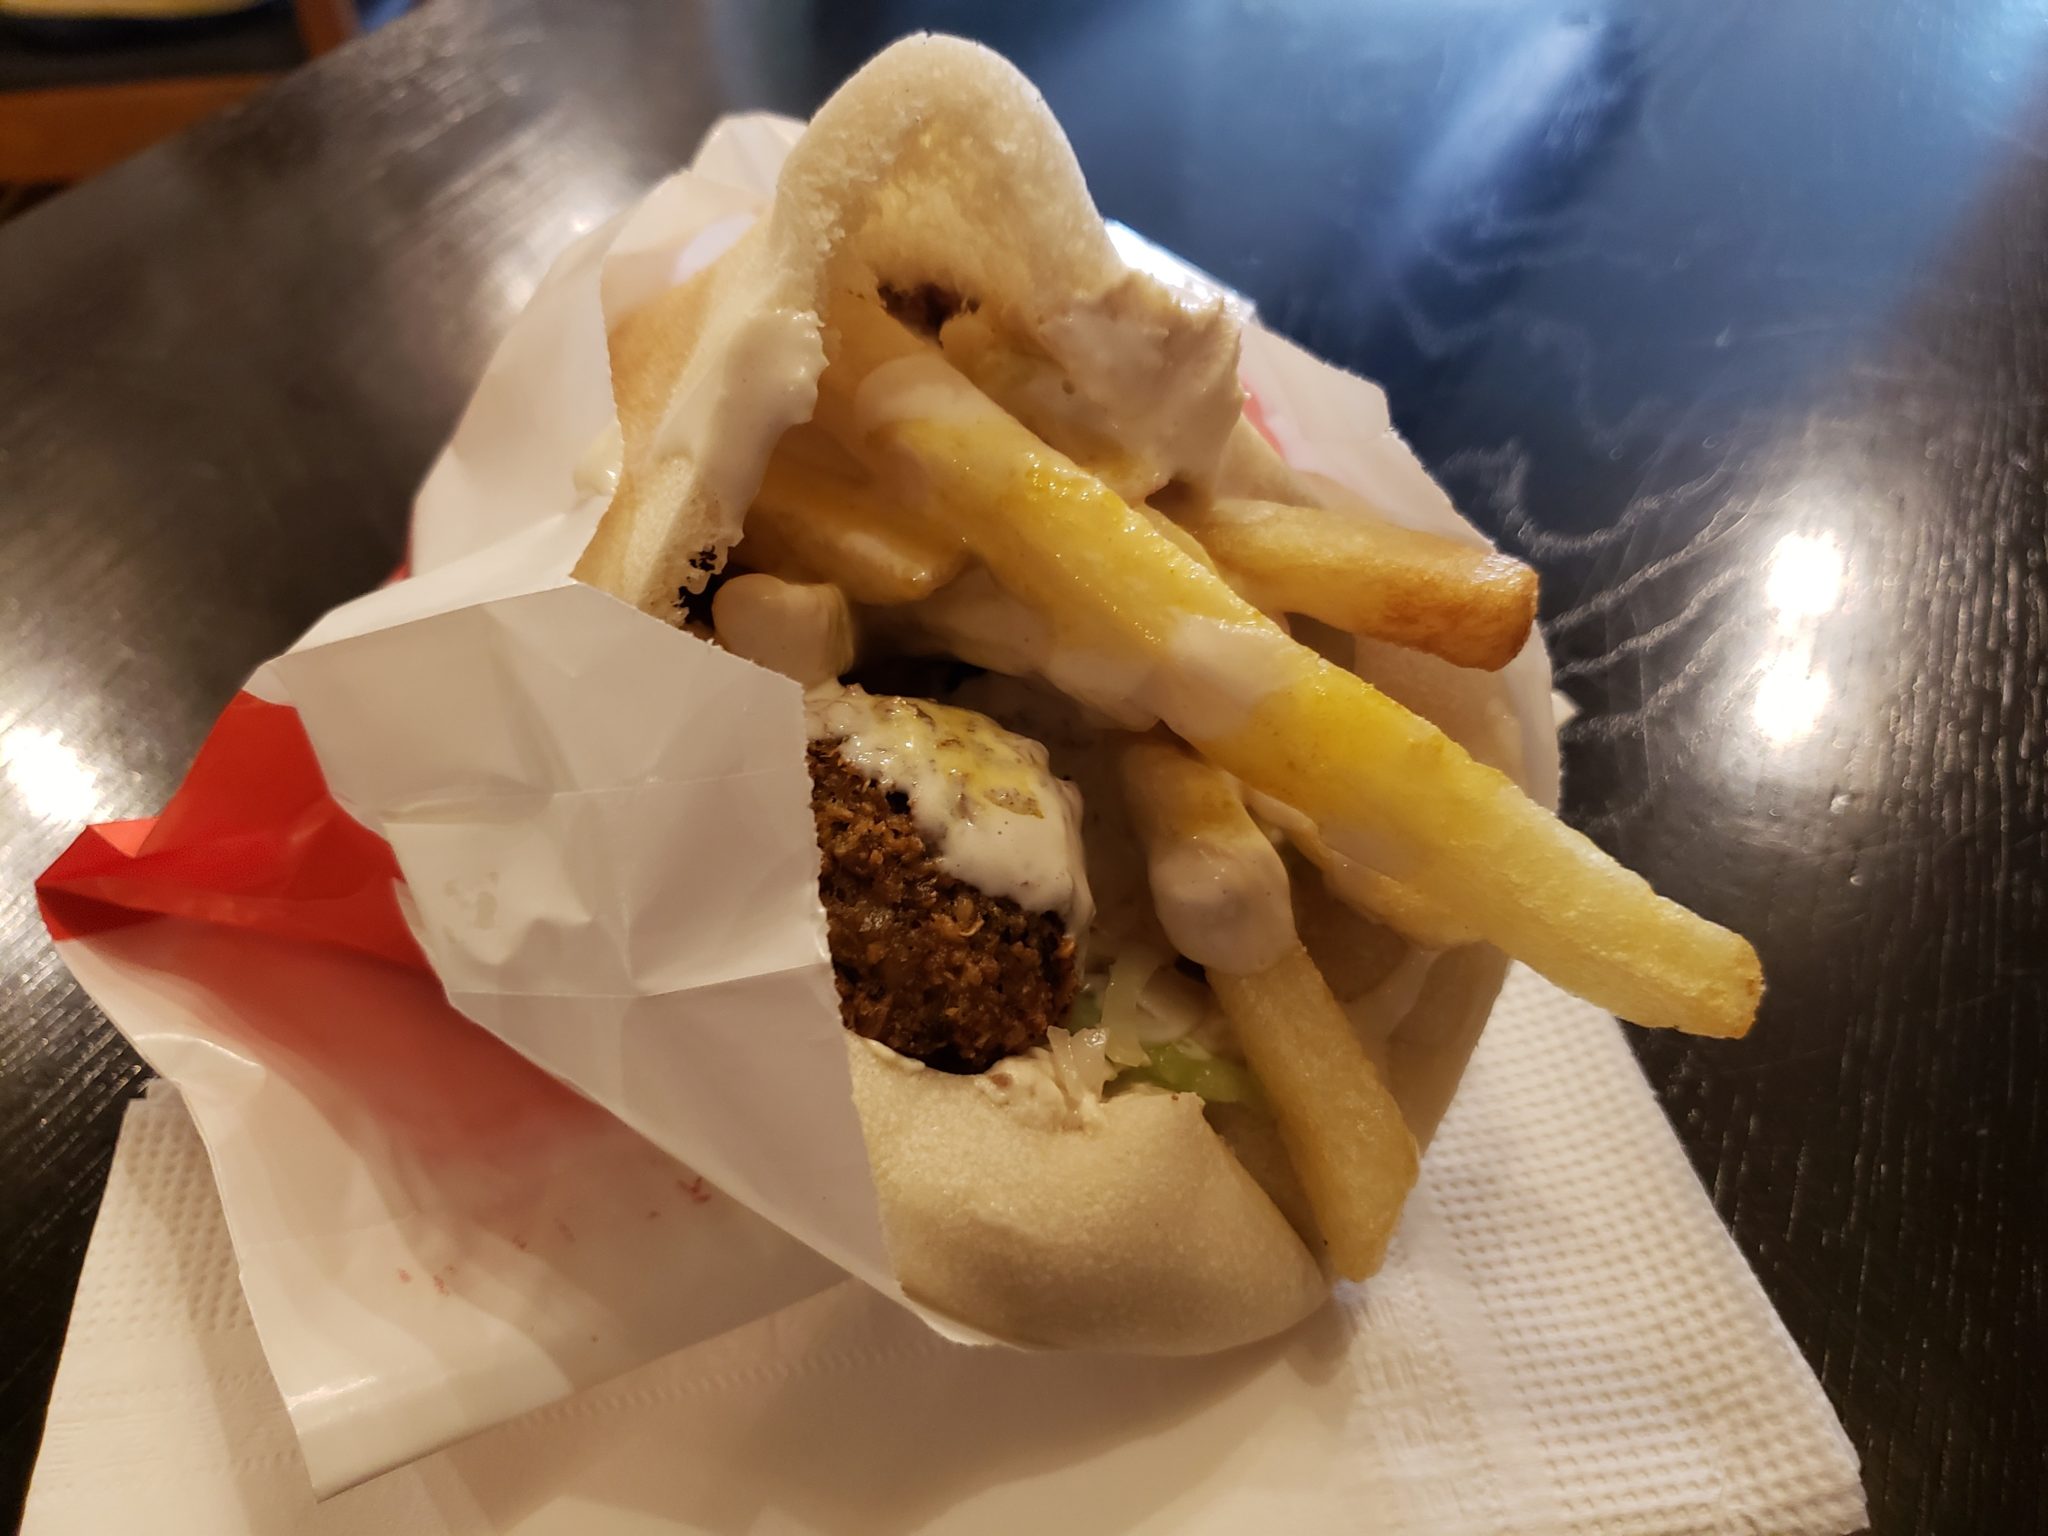 a pita with fries and meatball inside